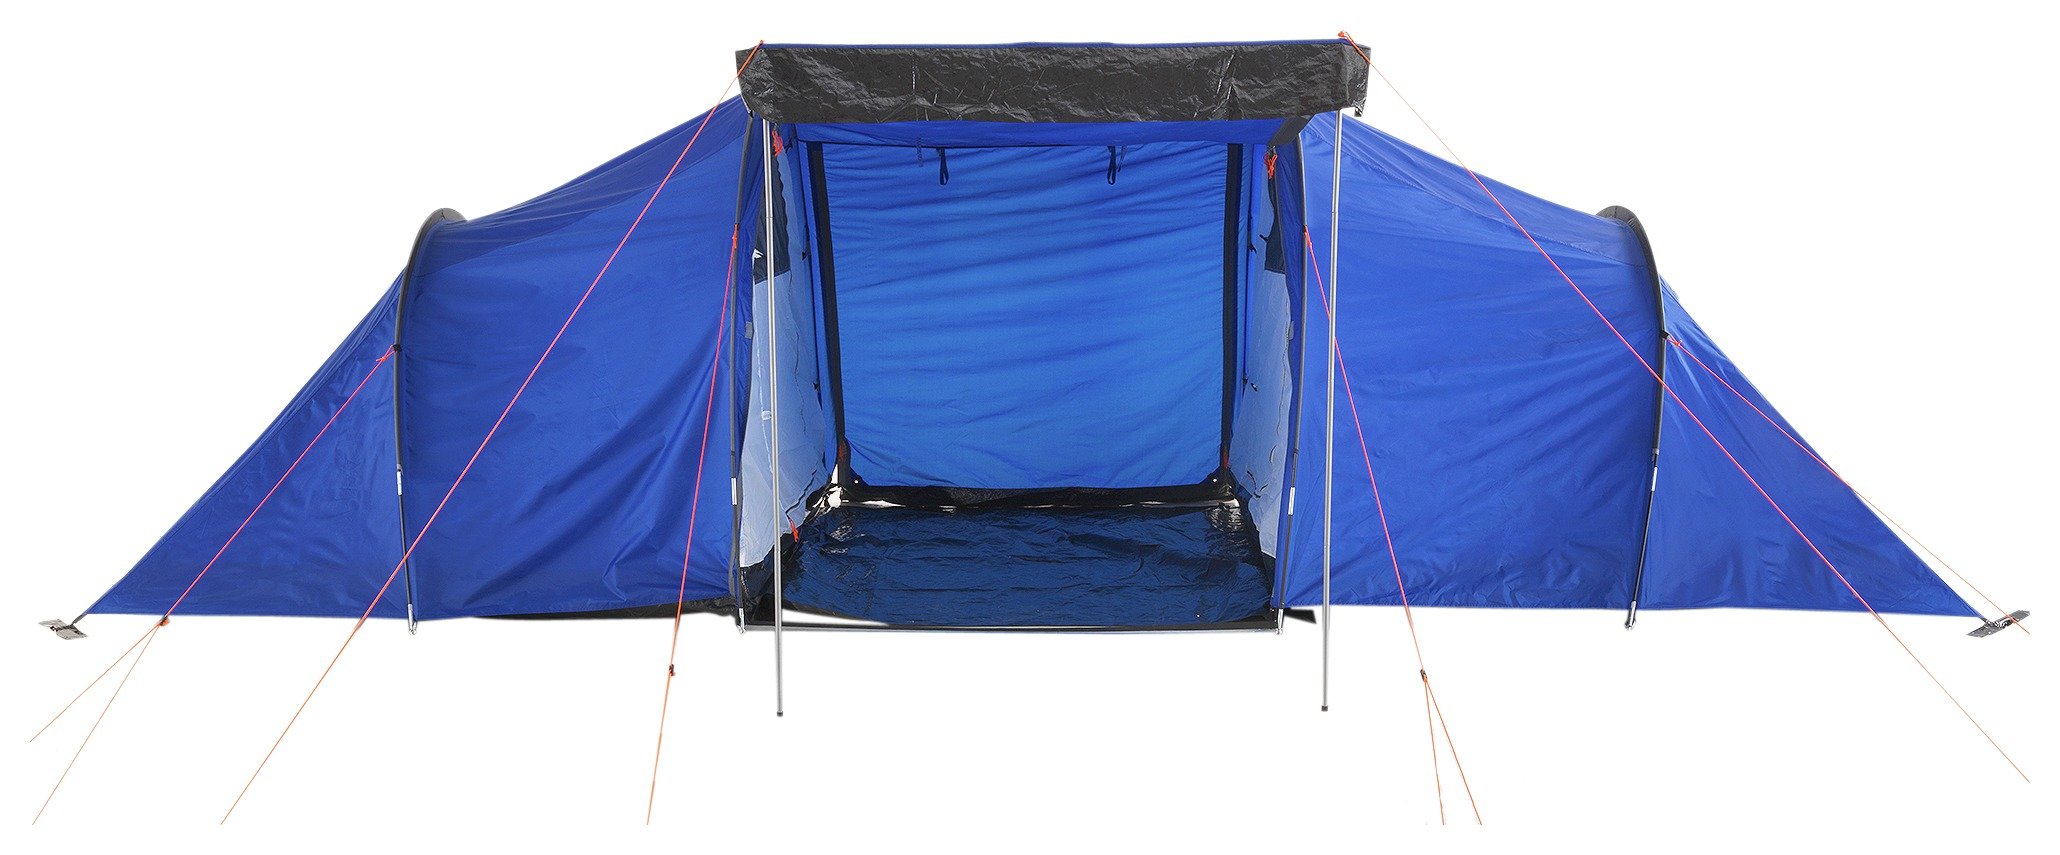 ProAction 6 Man 2 Room Tunnel Tent Reviews